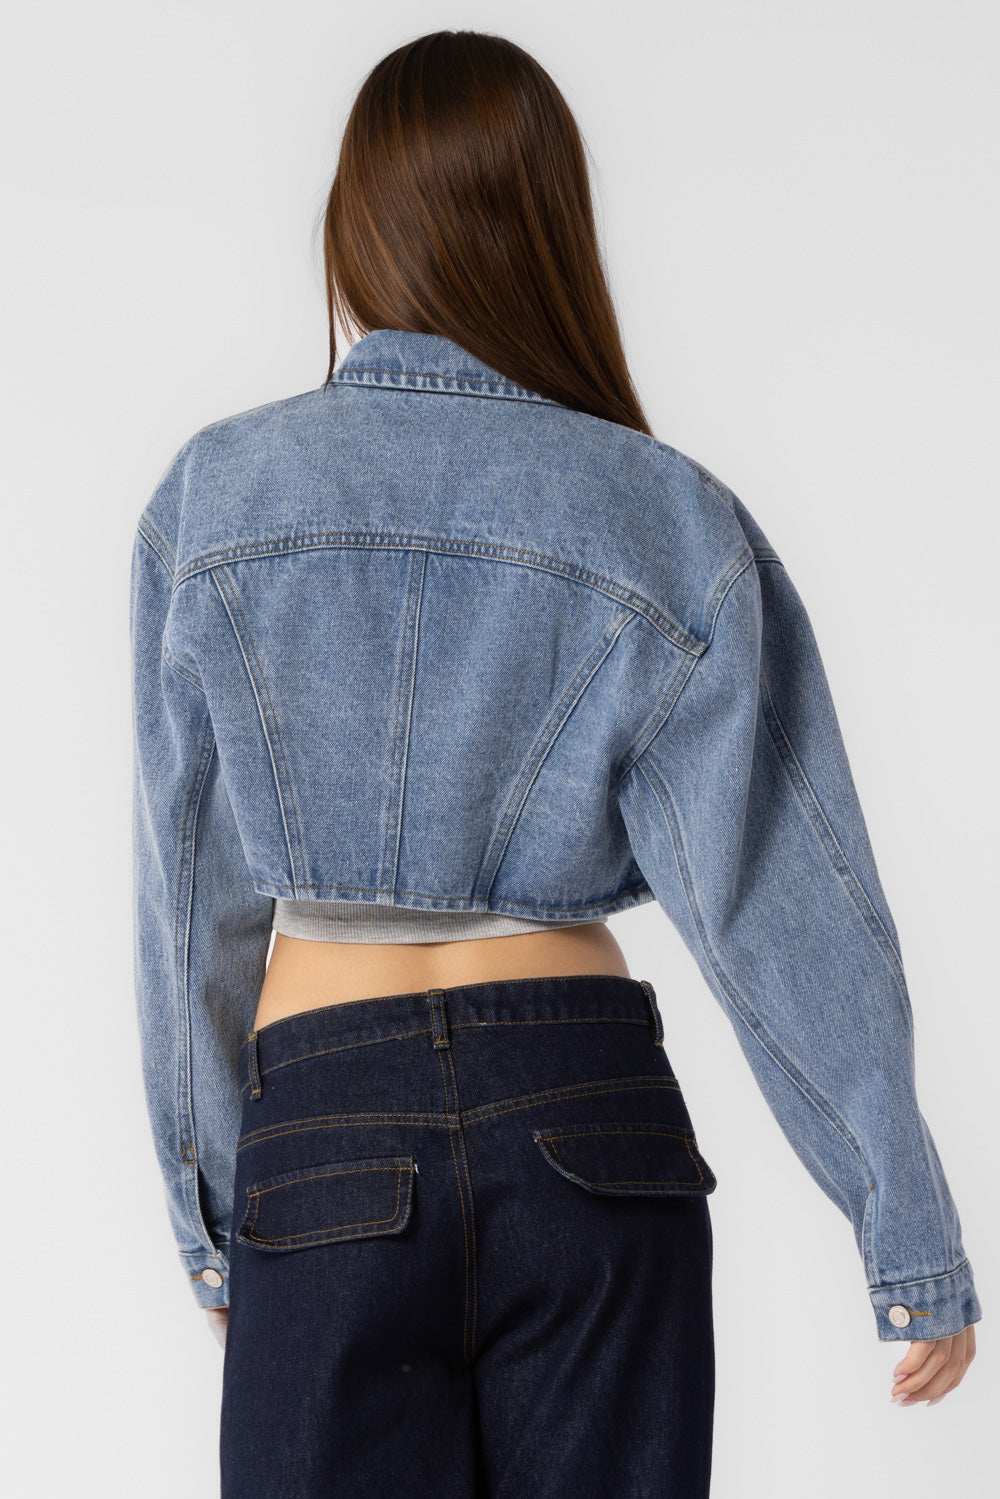 A model wearing a cropped denim jacket with backside view against a white wall. 